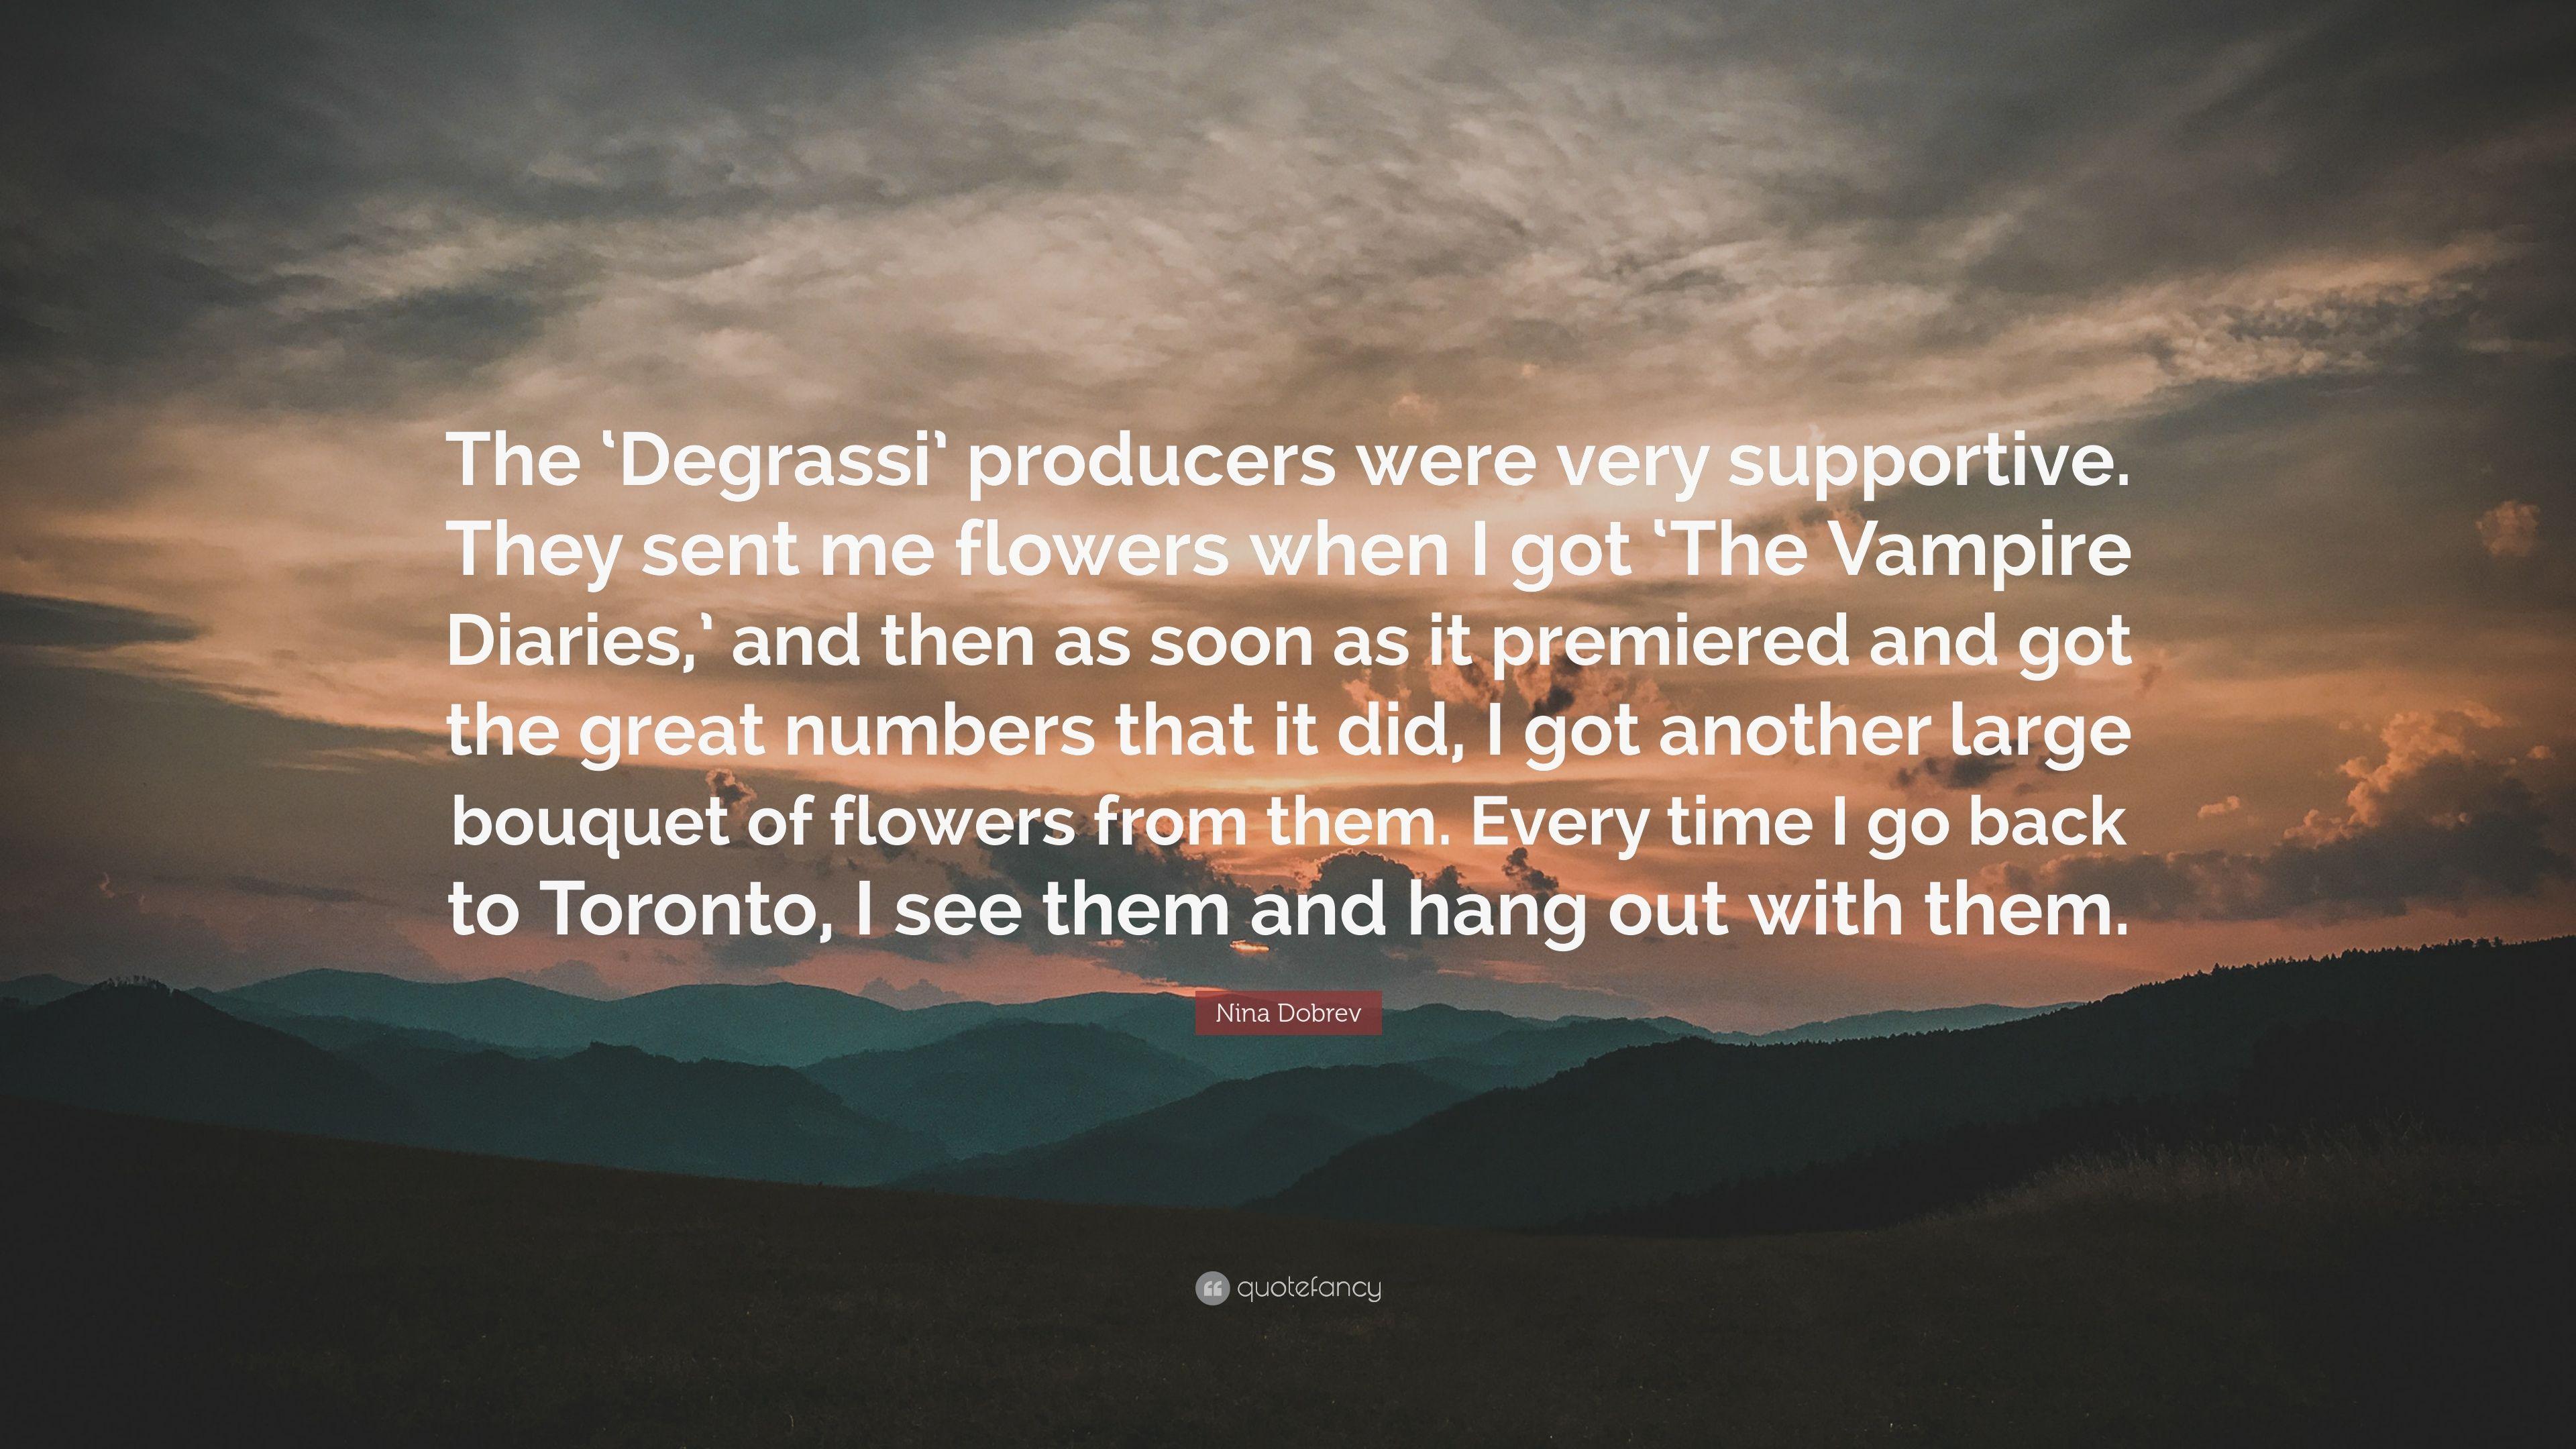 Nina Dobrev Quote: “The 'Degrassi' producers were very